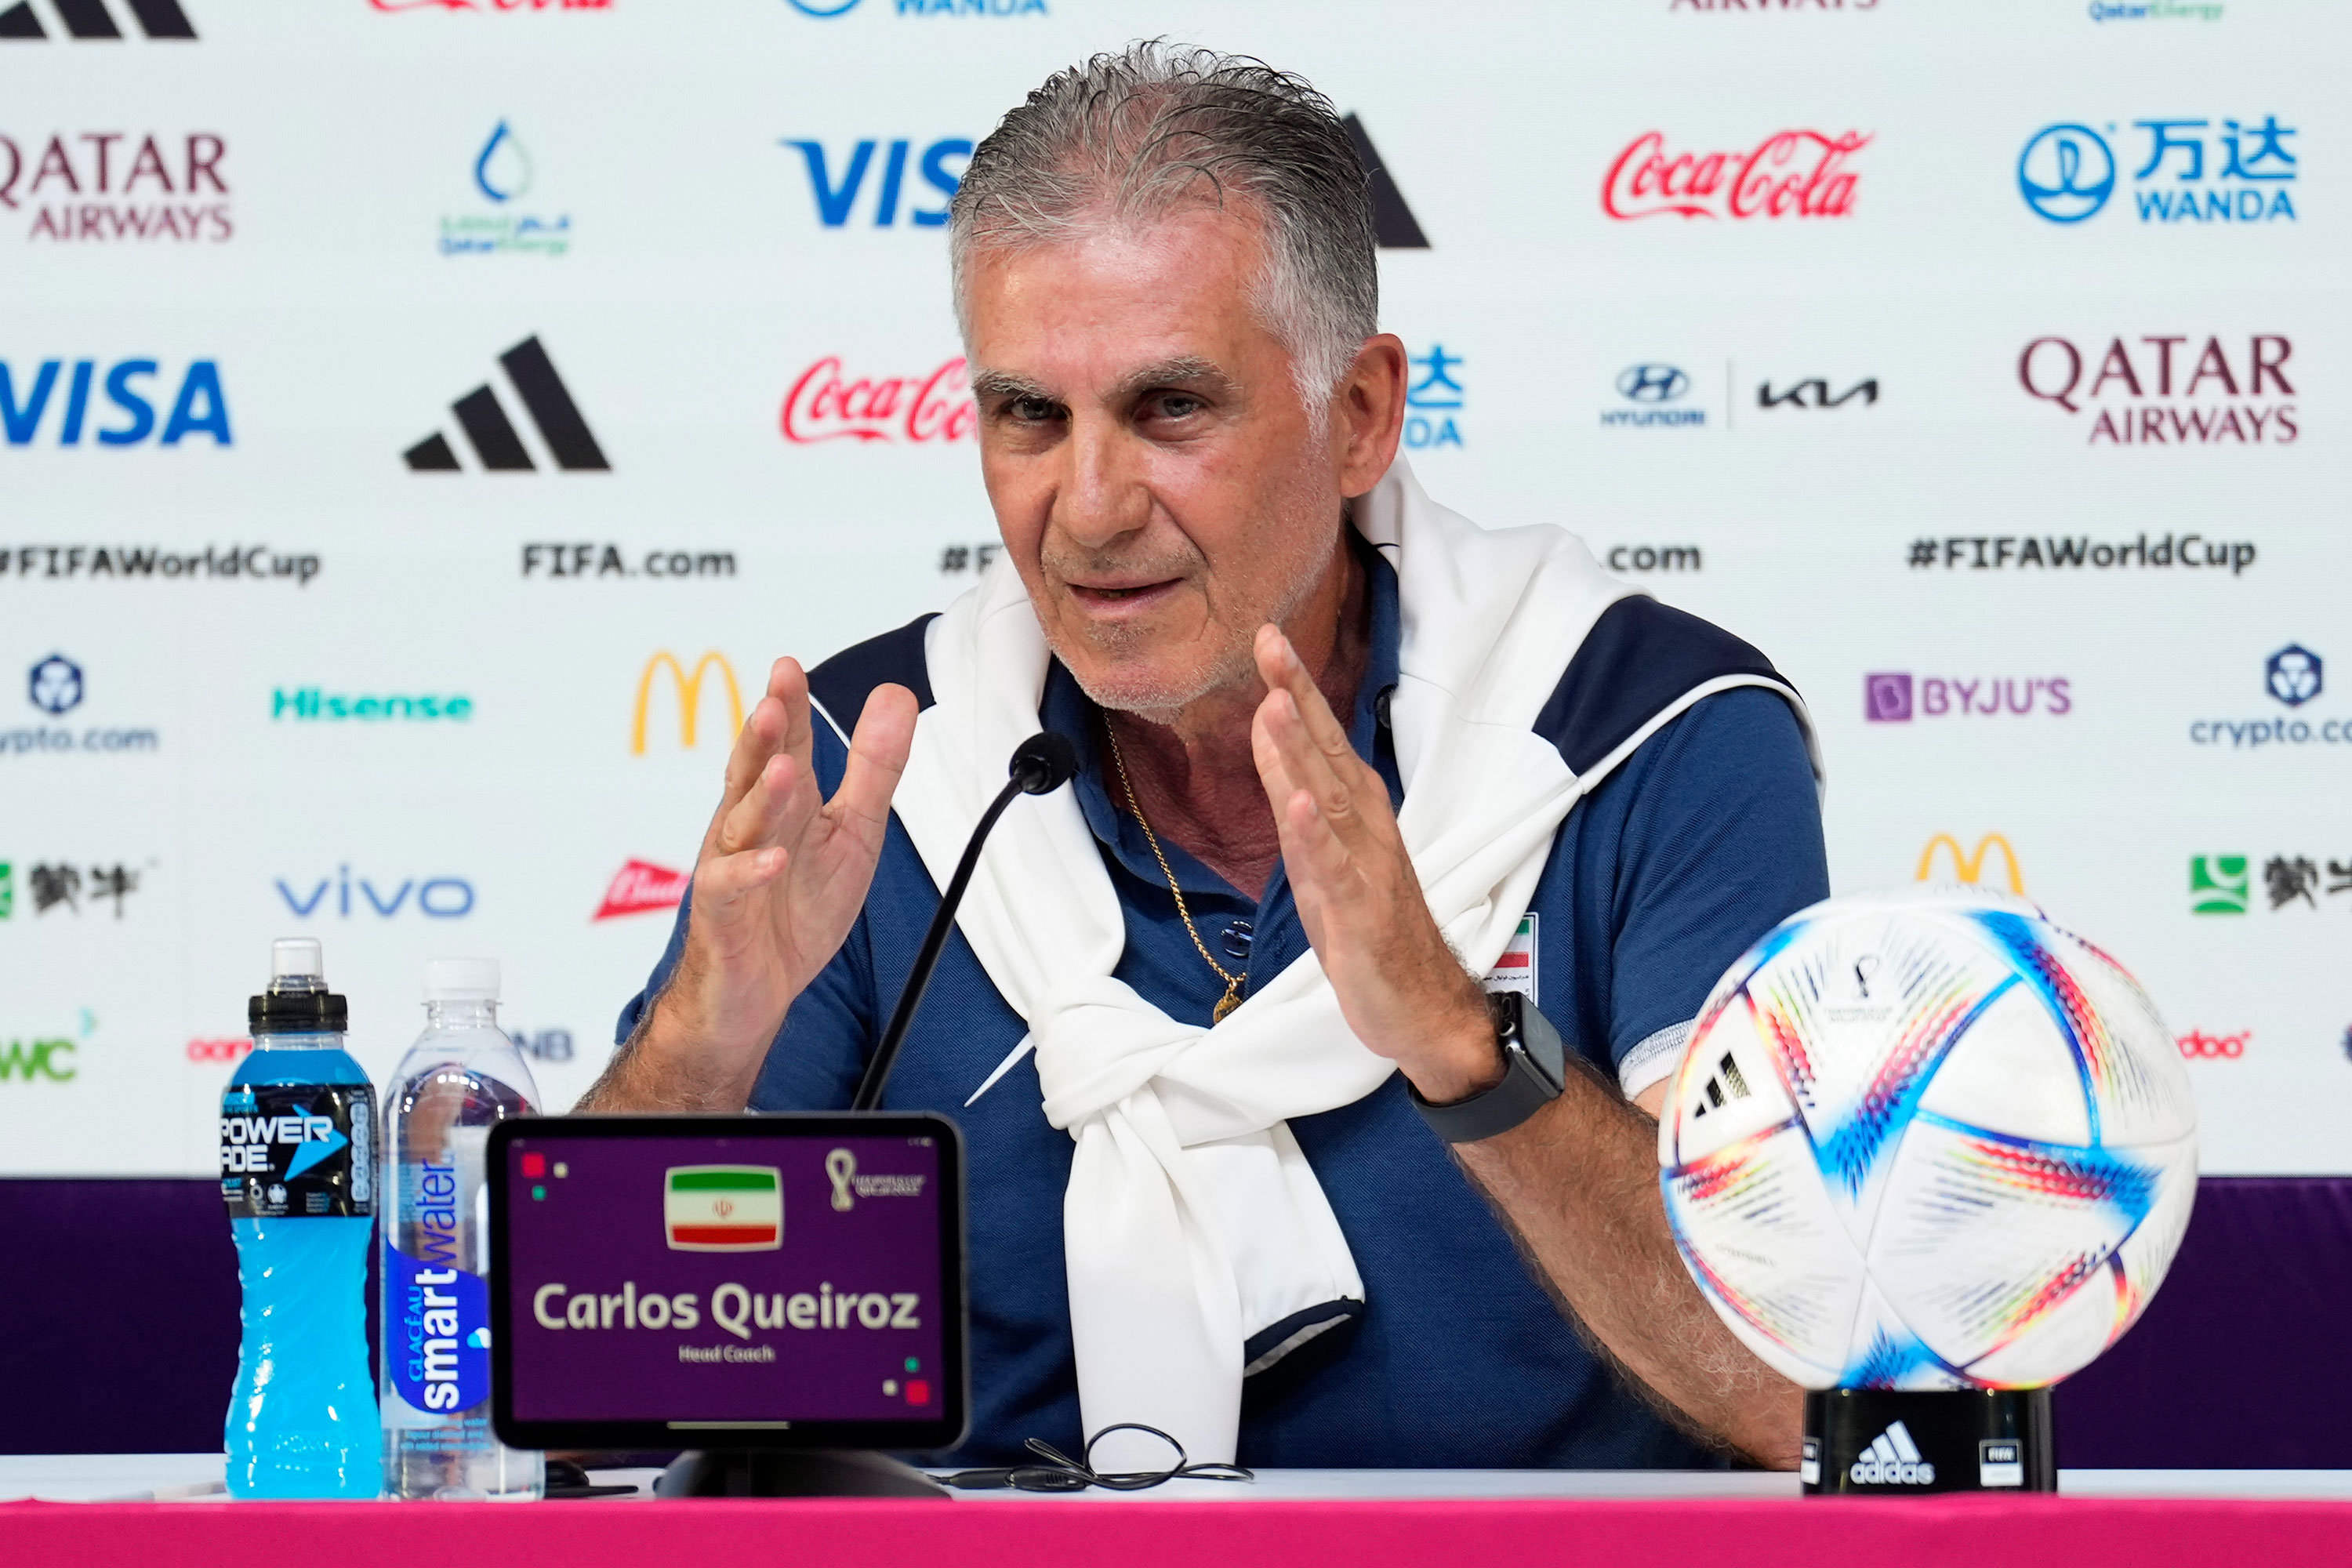 Iran's head coach Carlos Queiroz speaks a press conference on the eve of the match between Iran and the United States in Doha on November 28.